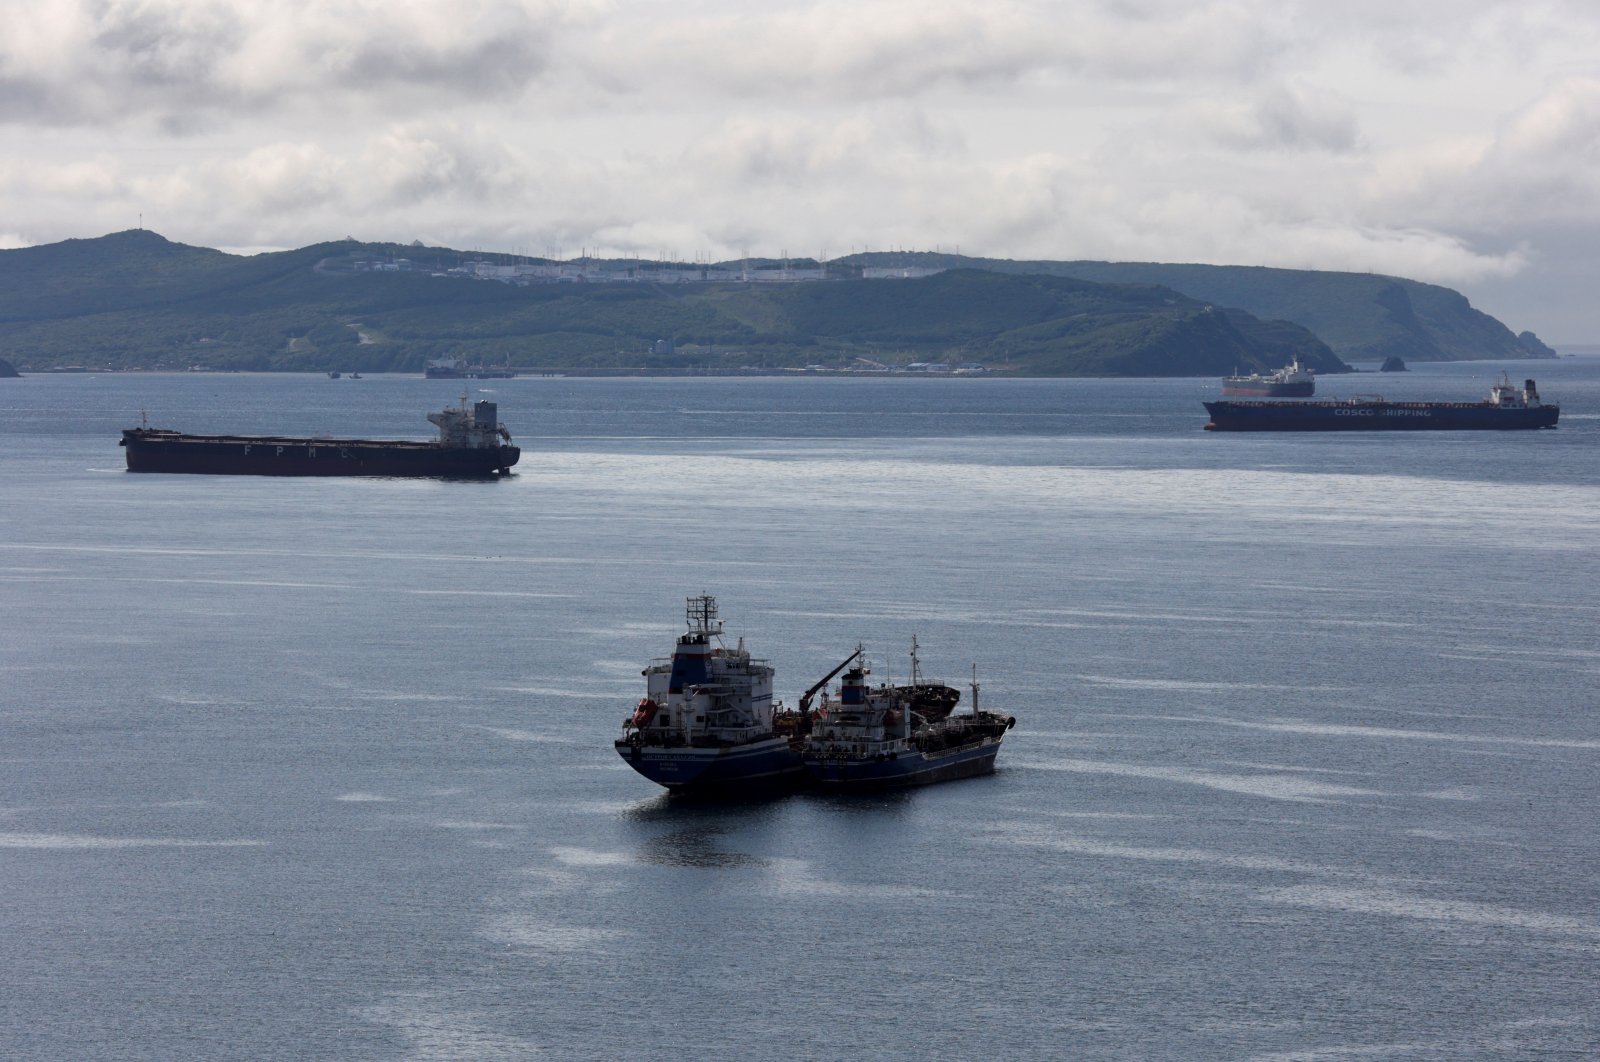 A view shows tankers in Nakhodka Bay near the crude oil terminal Kozmino outside the port city of Nakhodka, Russia, June 13, 2022. (Reuters File Photo)